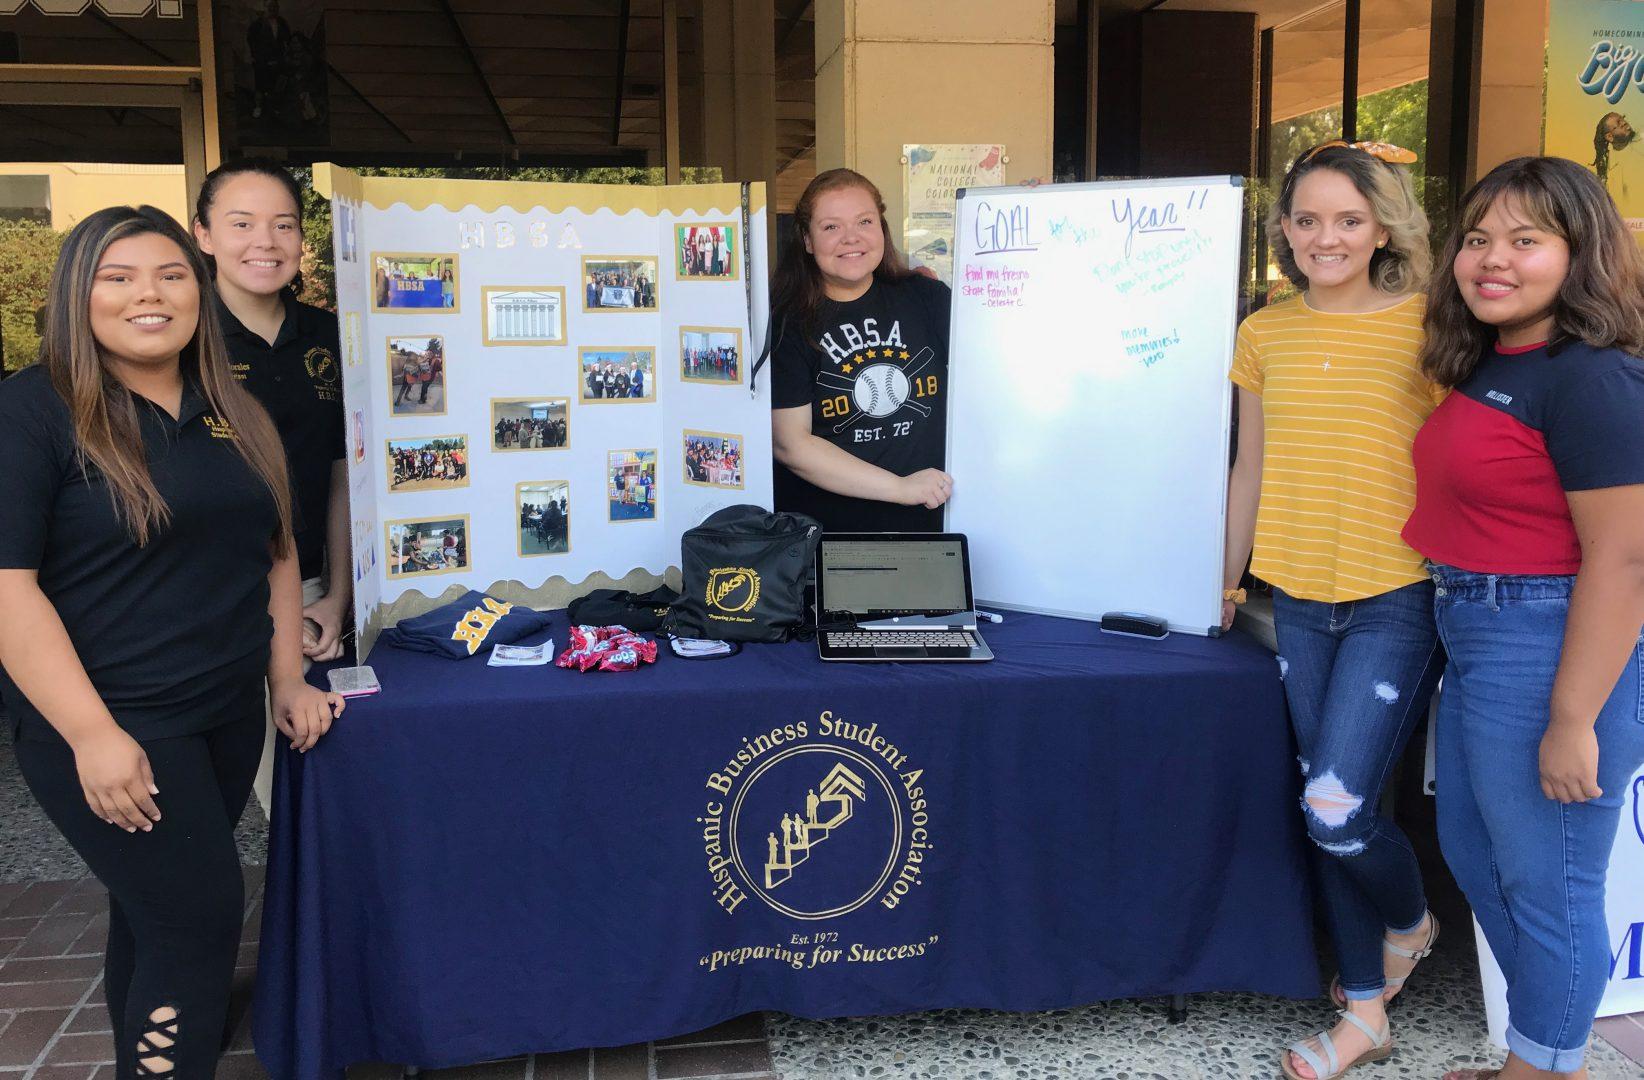 (From left to right) President Ivette Palacios, historian Blanca Ramos, webmaster Robejoy Escario and banquet co-chairs Veronica Morales and Celeste Ceballos stand in front of their booth for the Hispanic Business Student Association during Traditions Day at University Student Union’s balcony on Wednesday, Aug. 28, 2019. (Rachel Lewis/The Collegian)